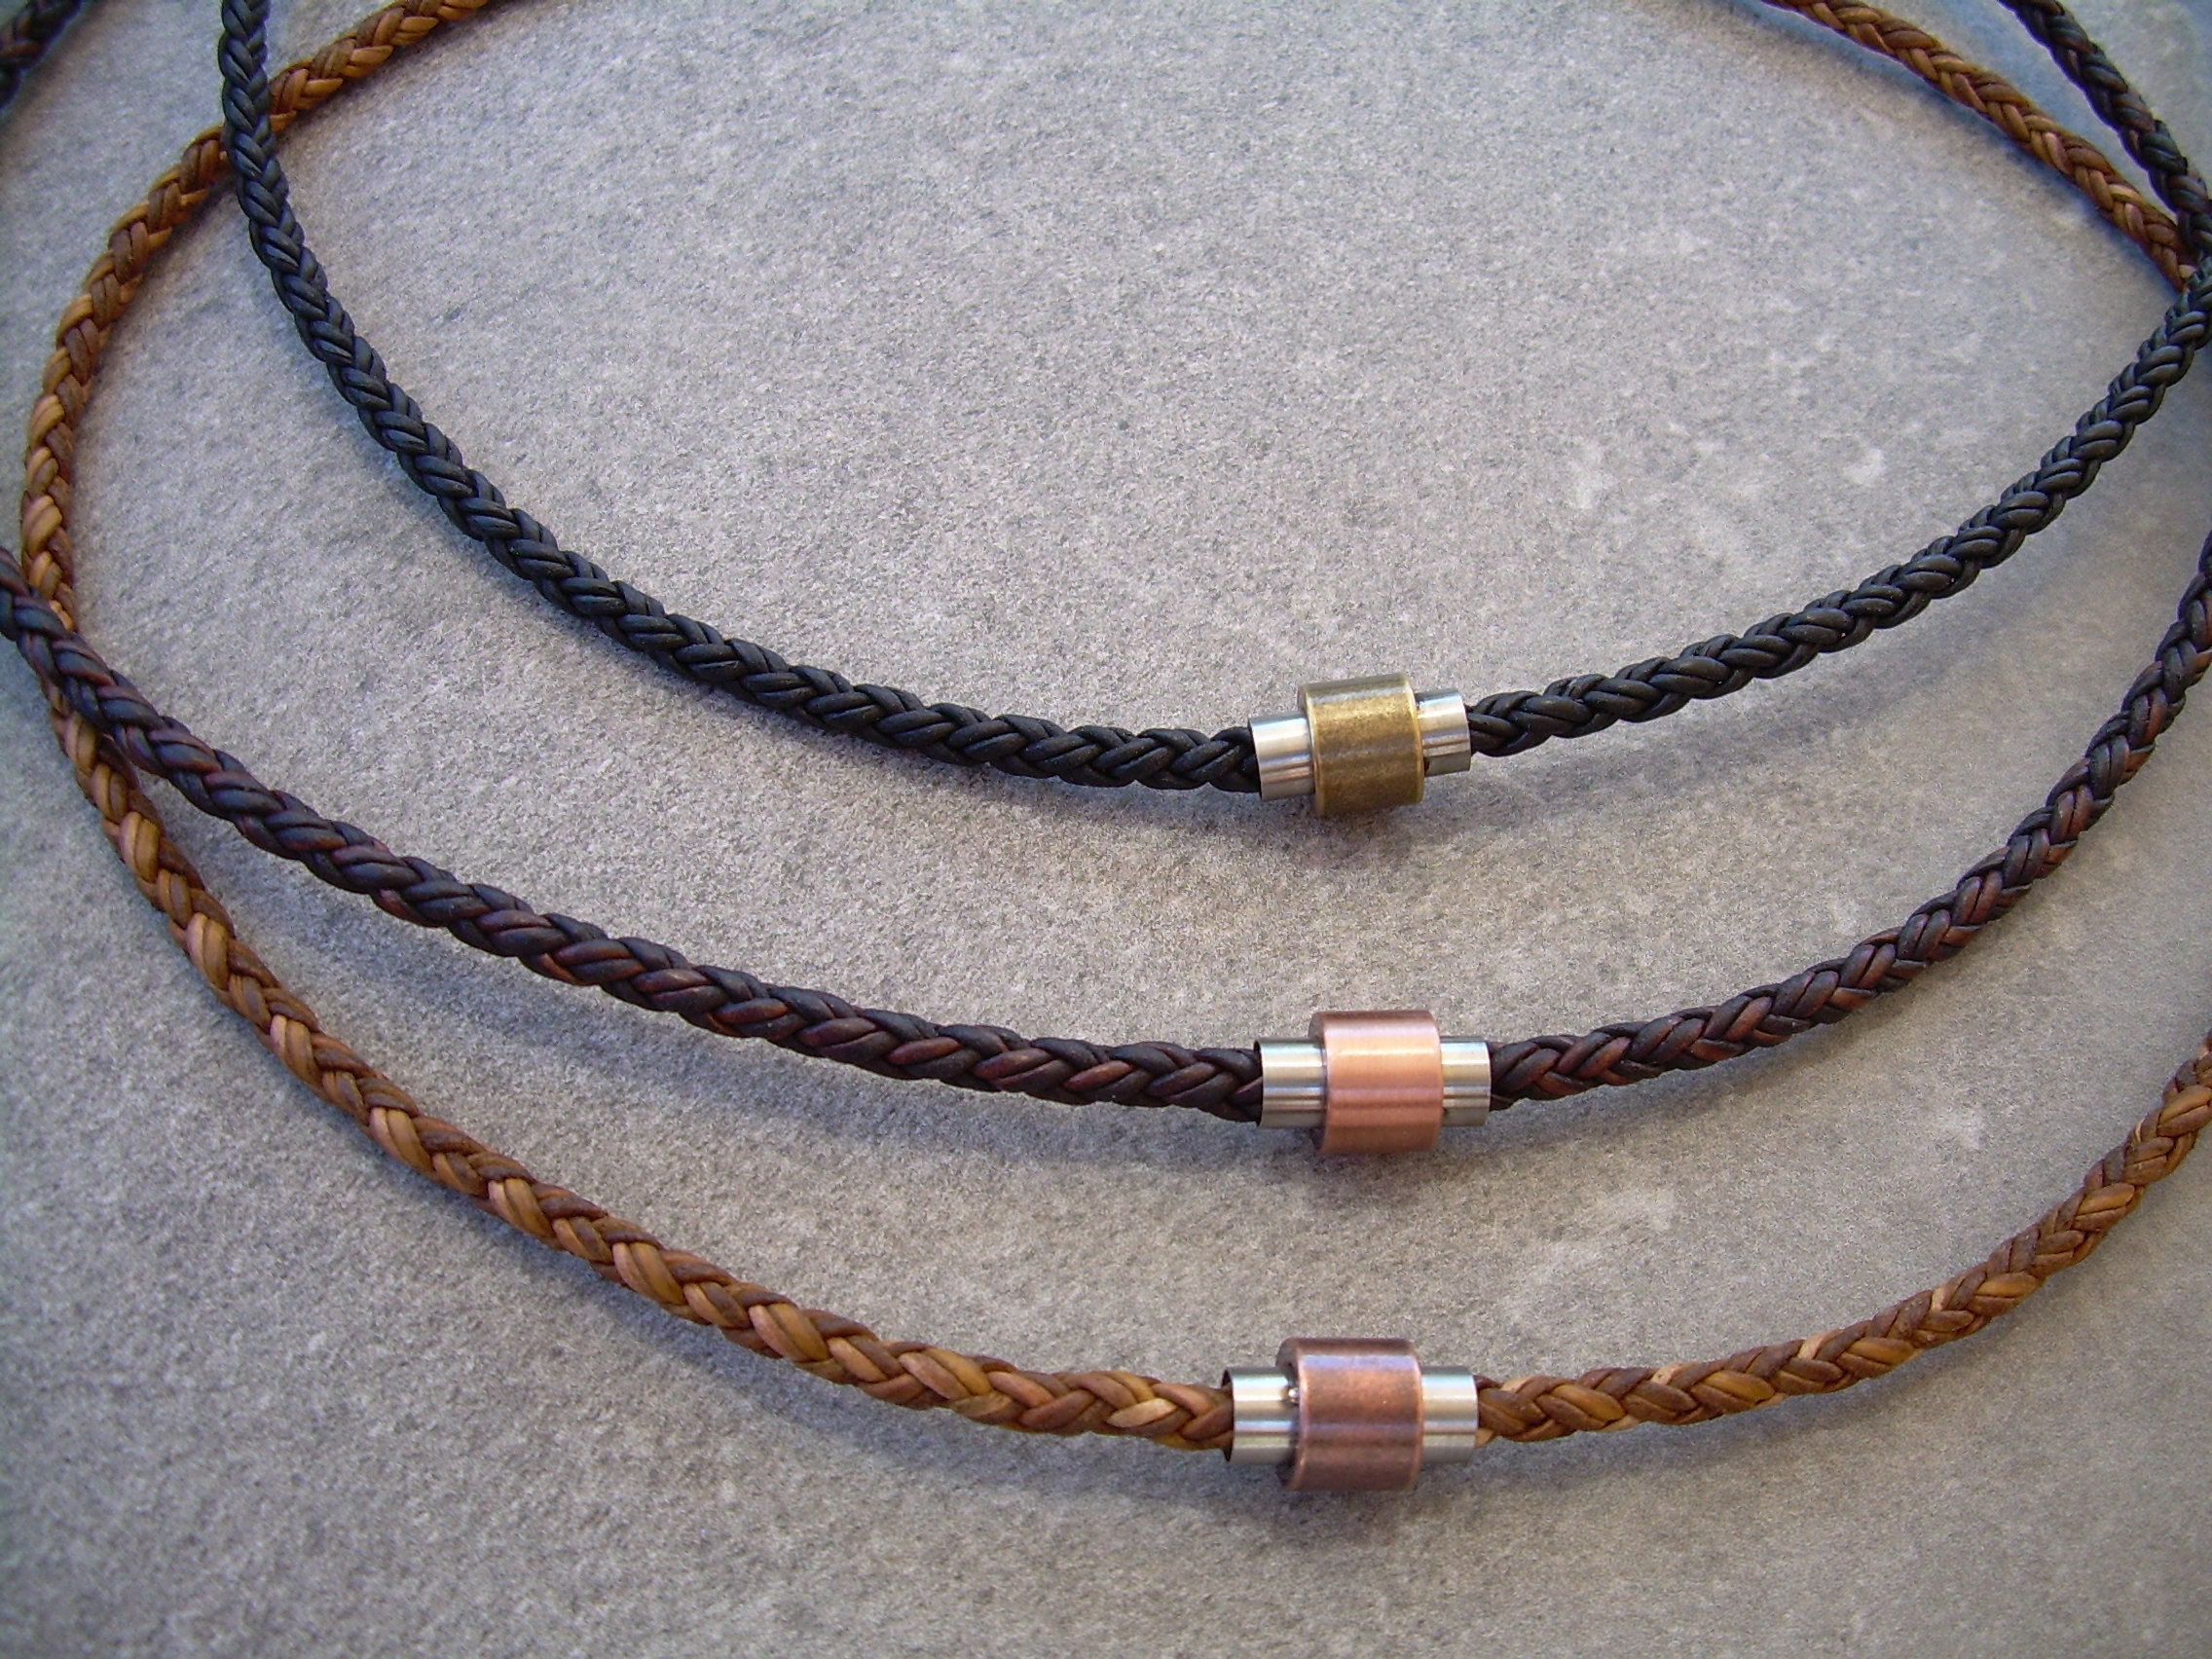 Braided Leather Necklace with Hexagon Stainless Steel Magnetic Clasp |  Urban Survival Gear USA